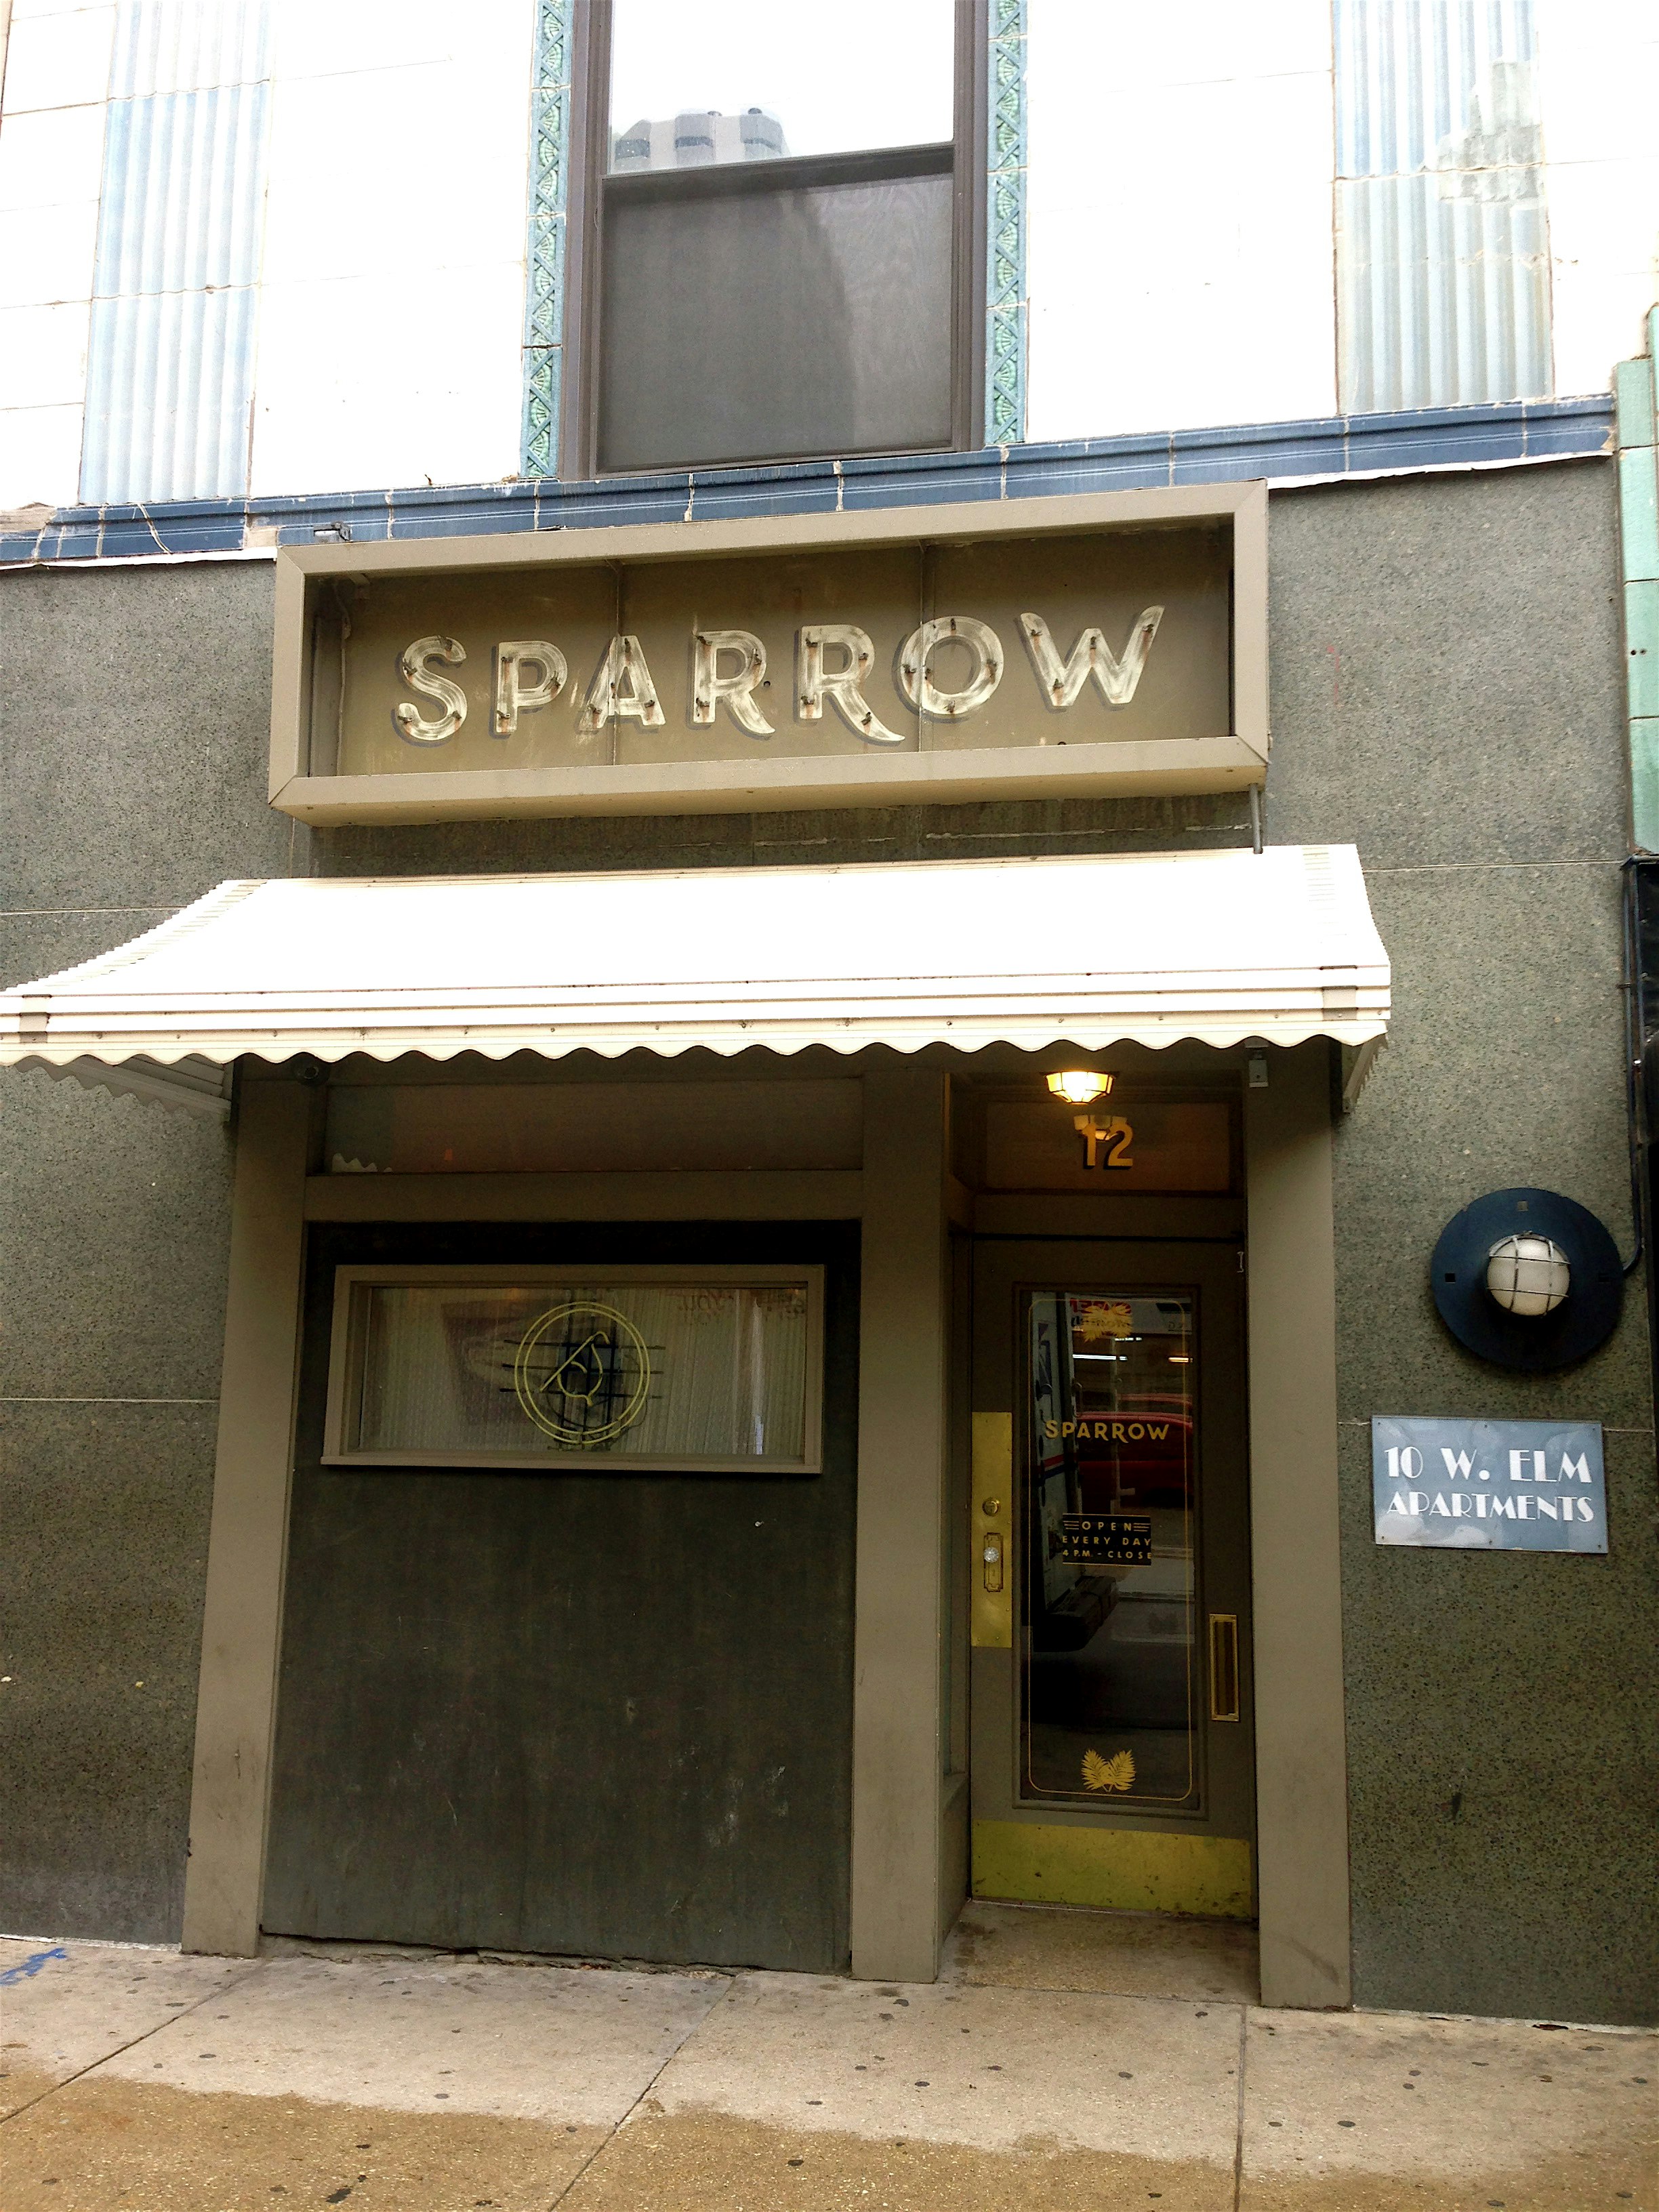 Sparrow is a gem of a cocktail lounge in Chicago's Gold Coast.